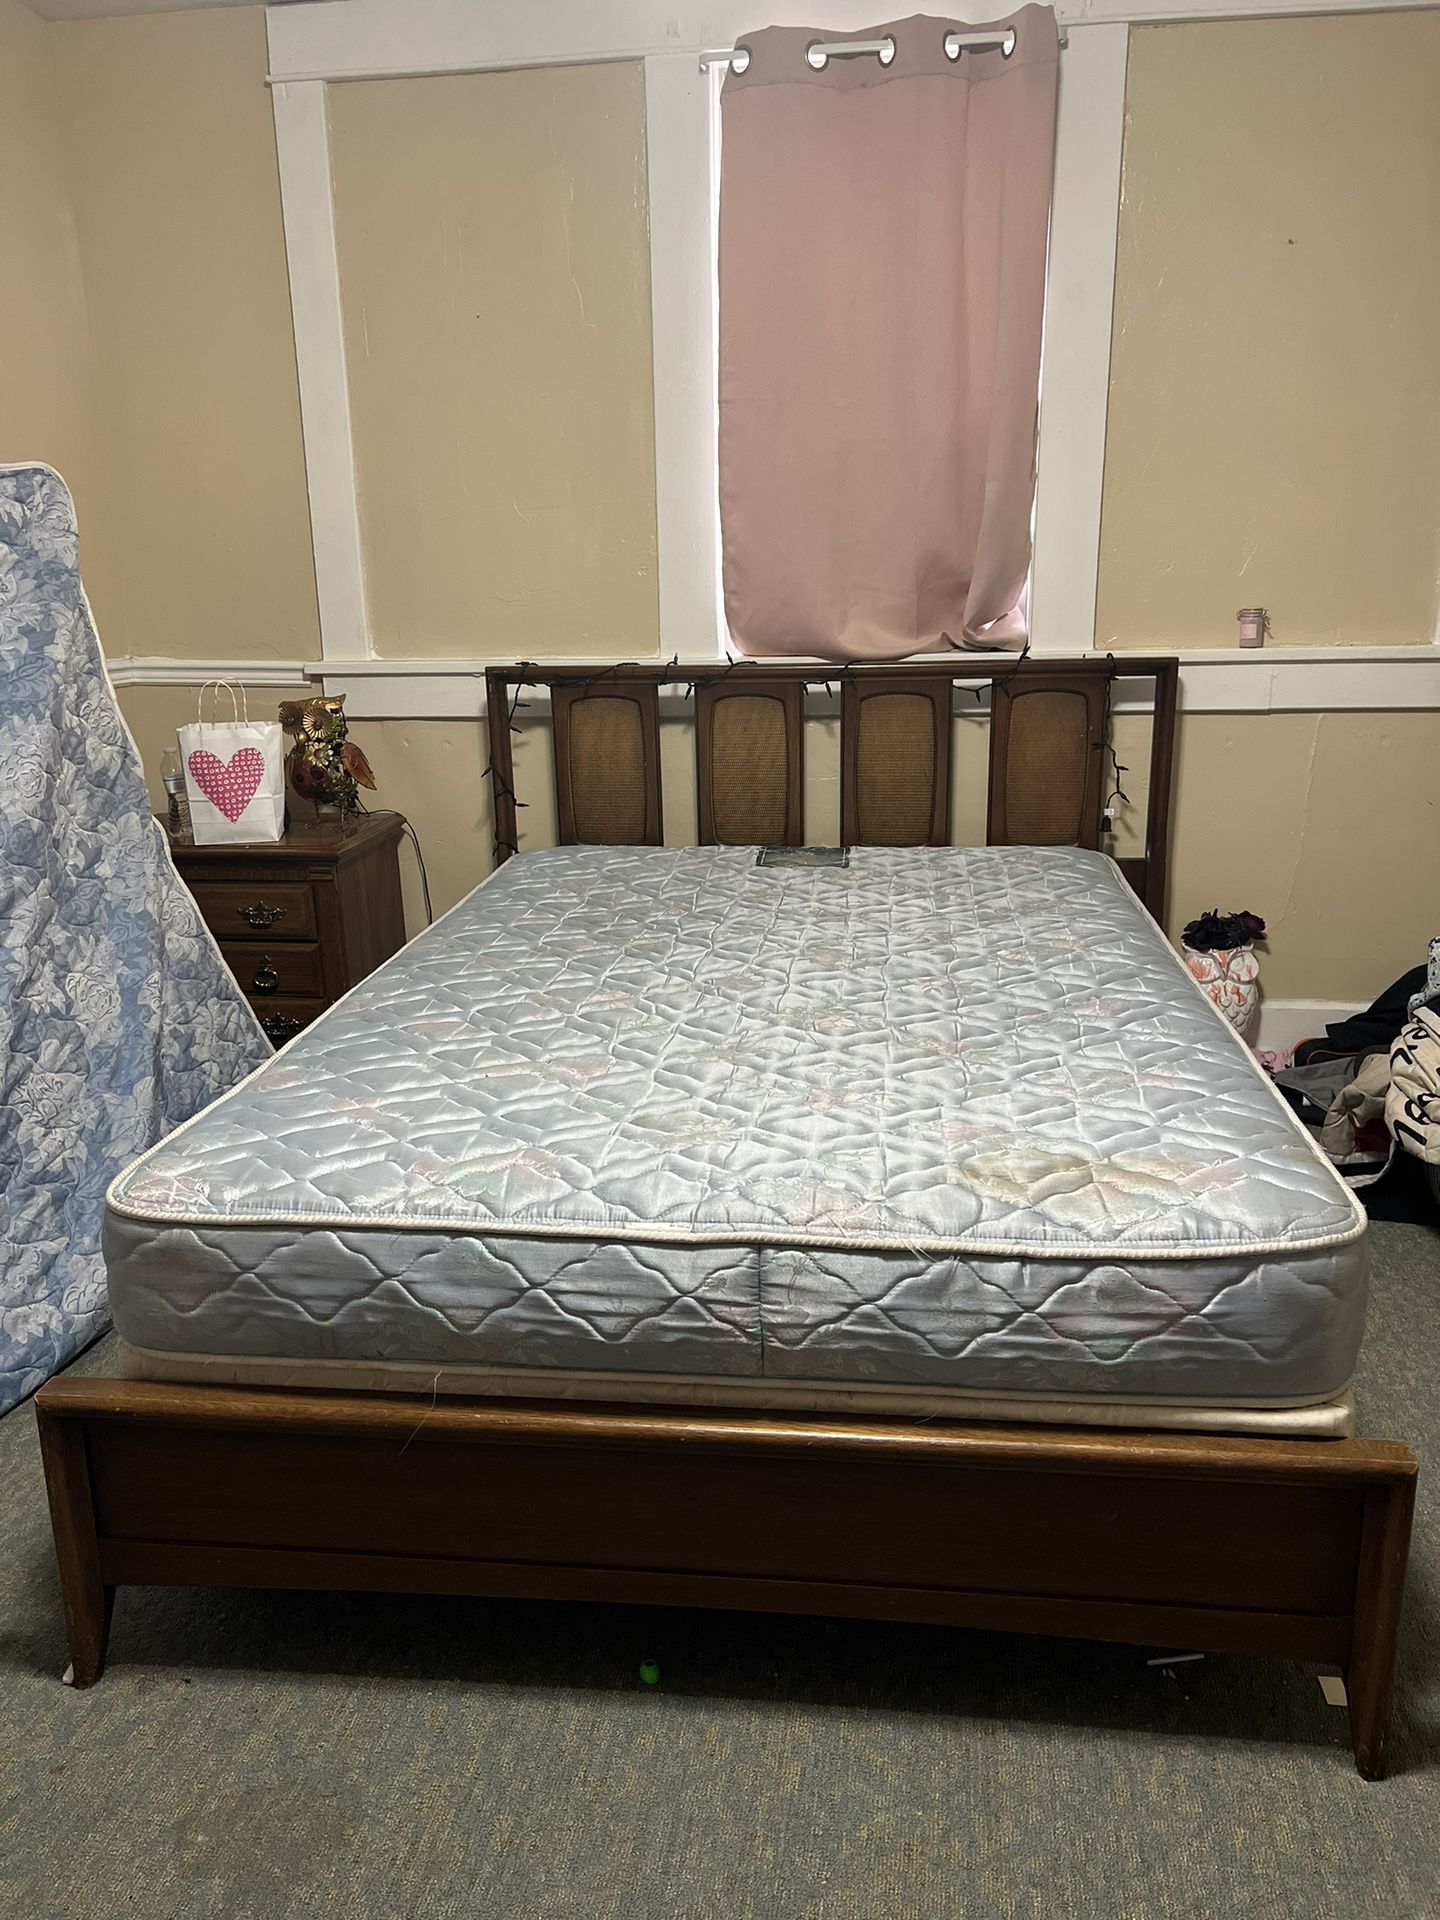 Full Size Mattress, Box Spring, And Frame